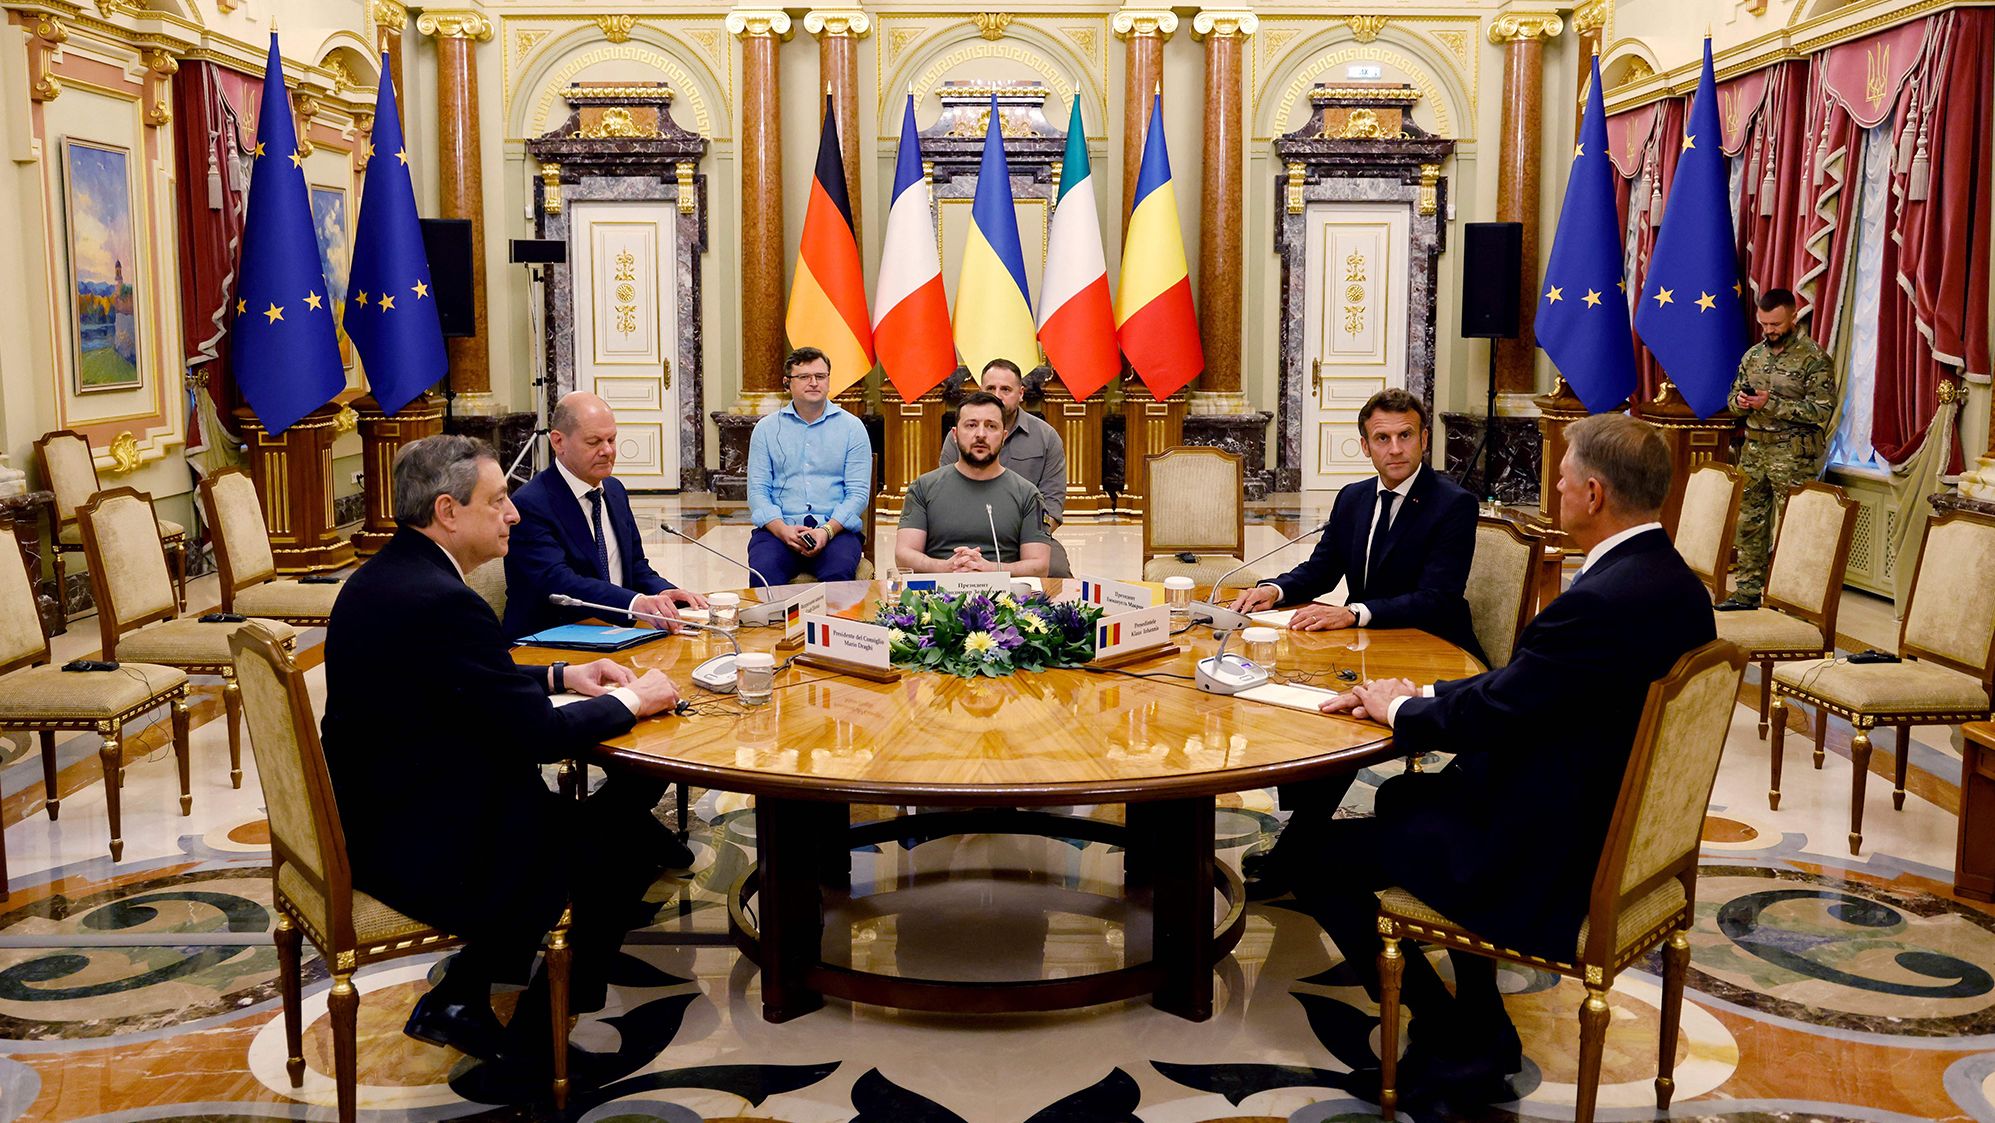 (From left) Italian Prime Minister Mario Draghi, German Chancellor Olaf Scholz, Ukrainian President Volodymyr Zelensky, French President Emmanuel Macron and Romanian President Klaus Iohannis meet for a working session in Mariinsky Palace in Kyiv on June 16, 2022. 